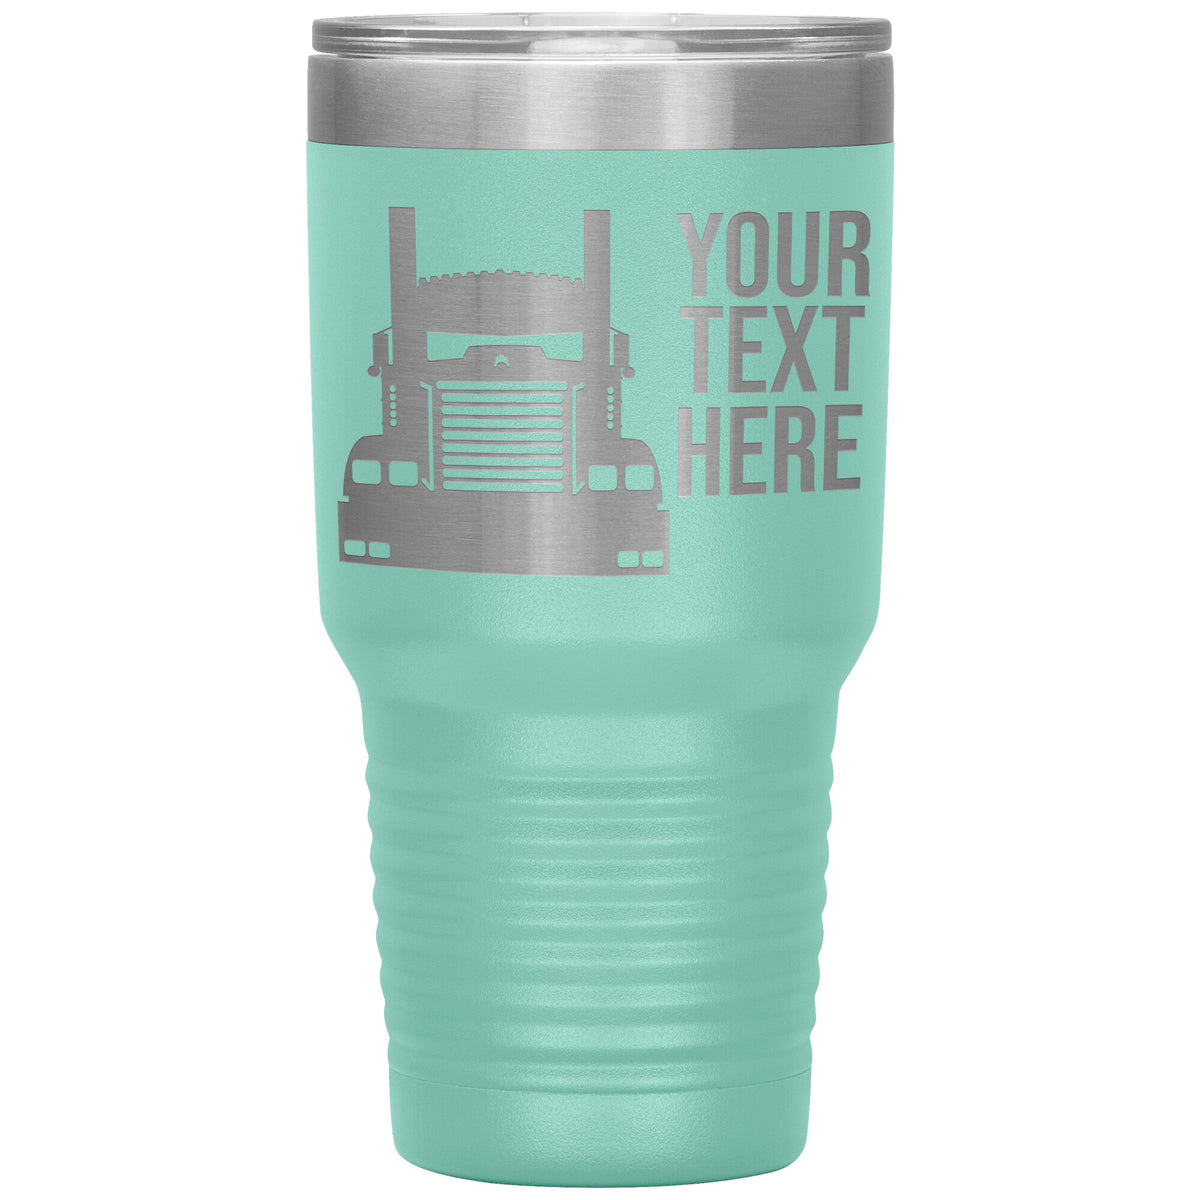 KW 900 Your Text Here 30oz Tumbler Free Shipping